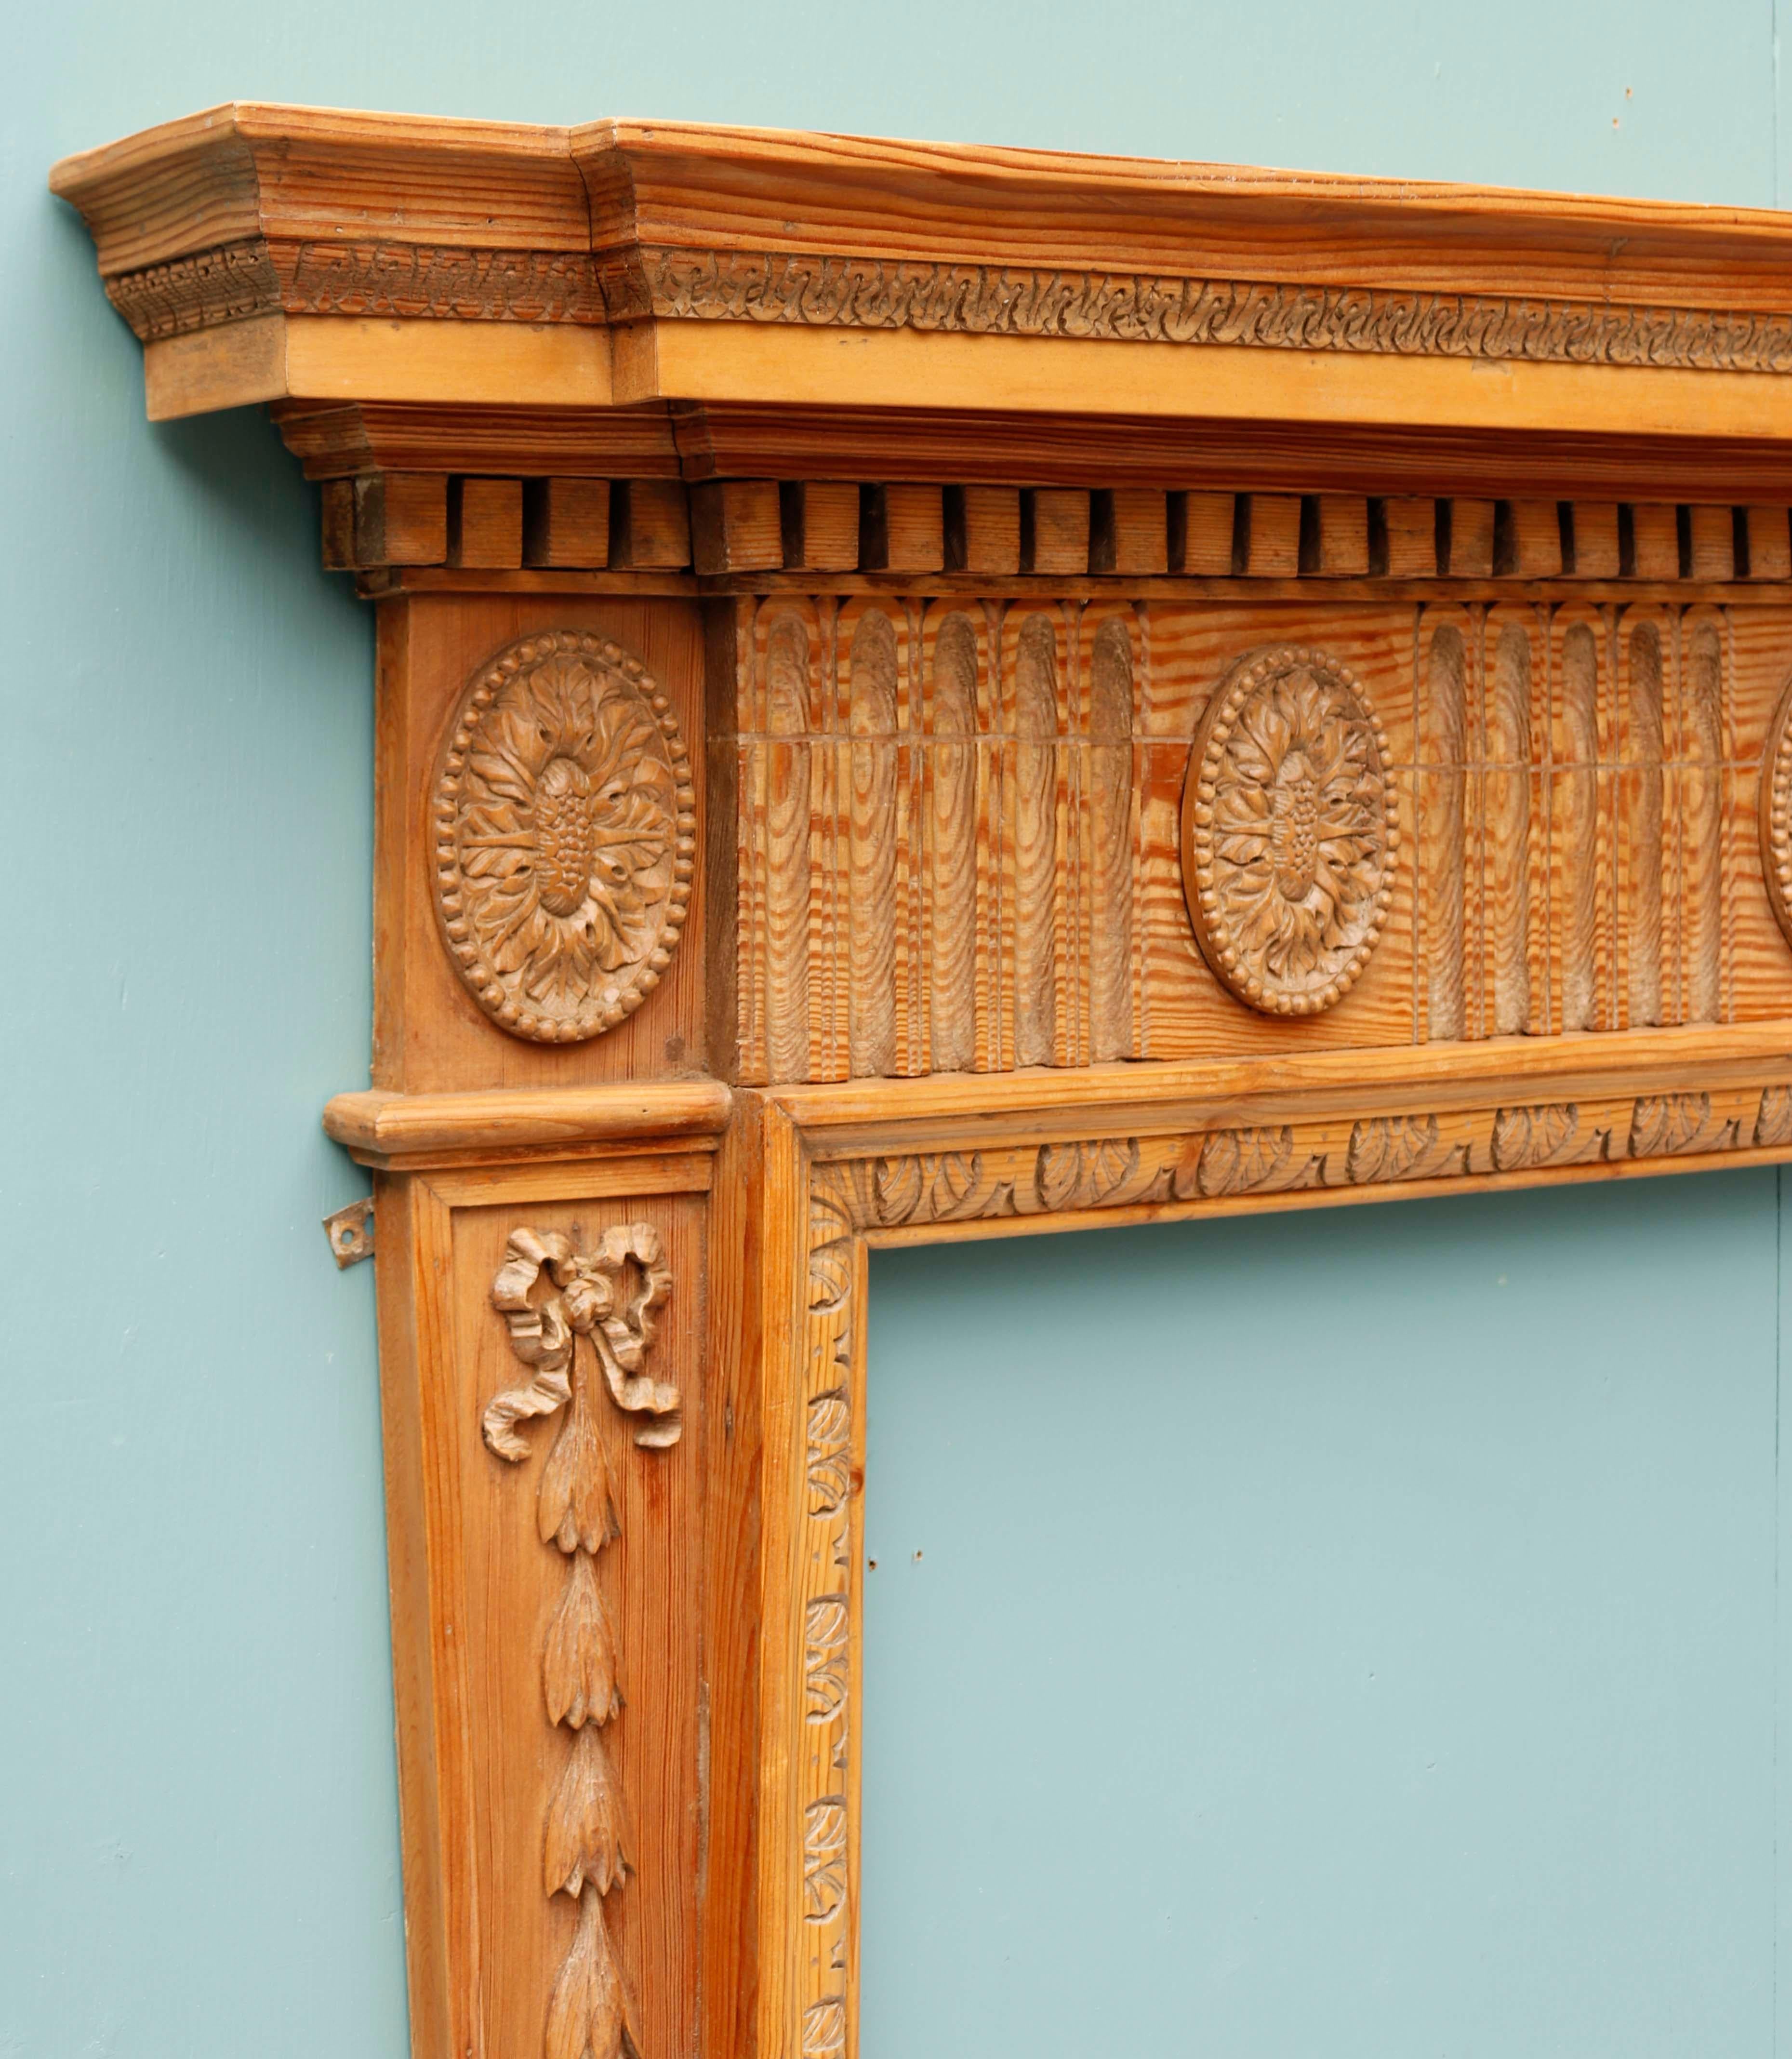 Antique English carved fireplace. An early 19th century English carved fireplace. With bell flower detailing along both jambs and intricate carved frieze.

Additional Dimensions

Opening height 98 cm

Opening width 111.5 cm

Across the foot